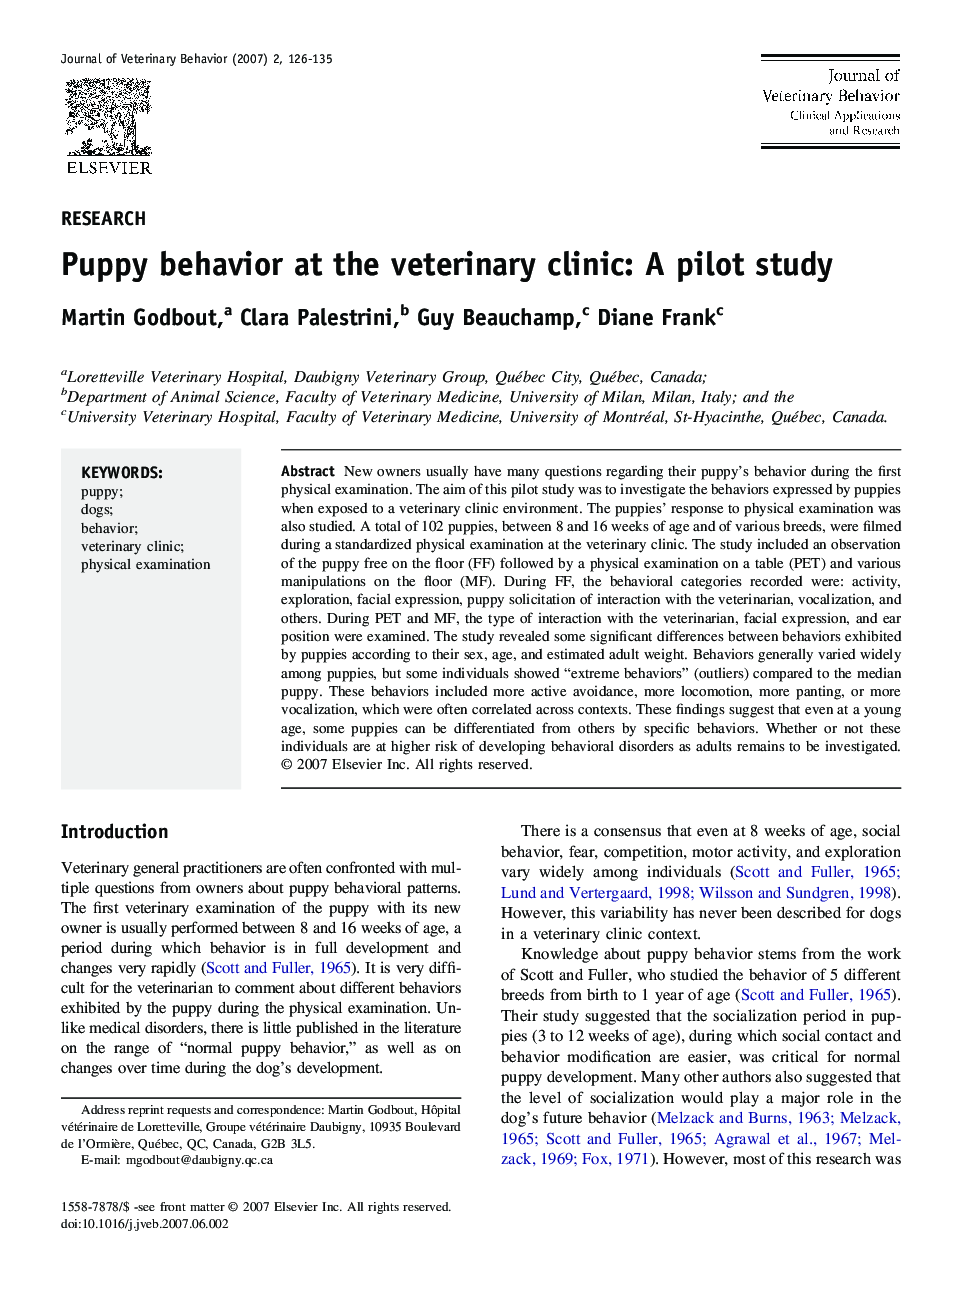 Puppy behavior at the veterinary clinic: A pilot study